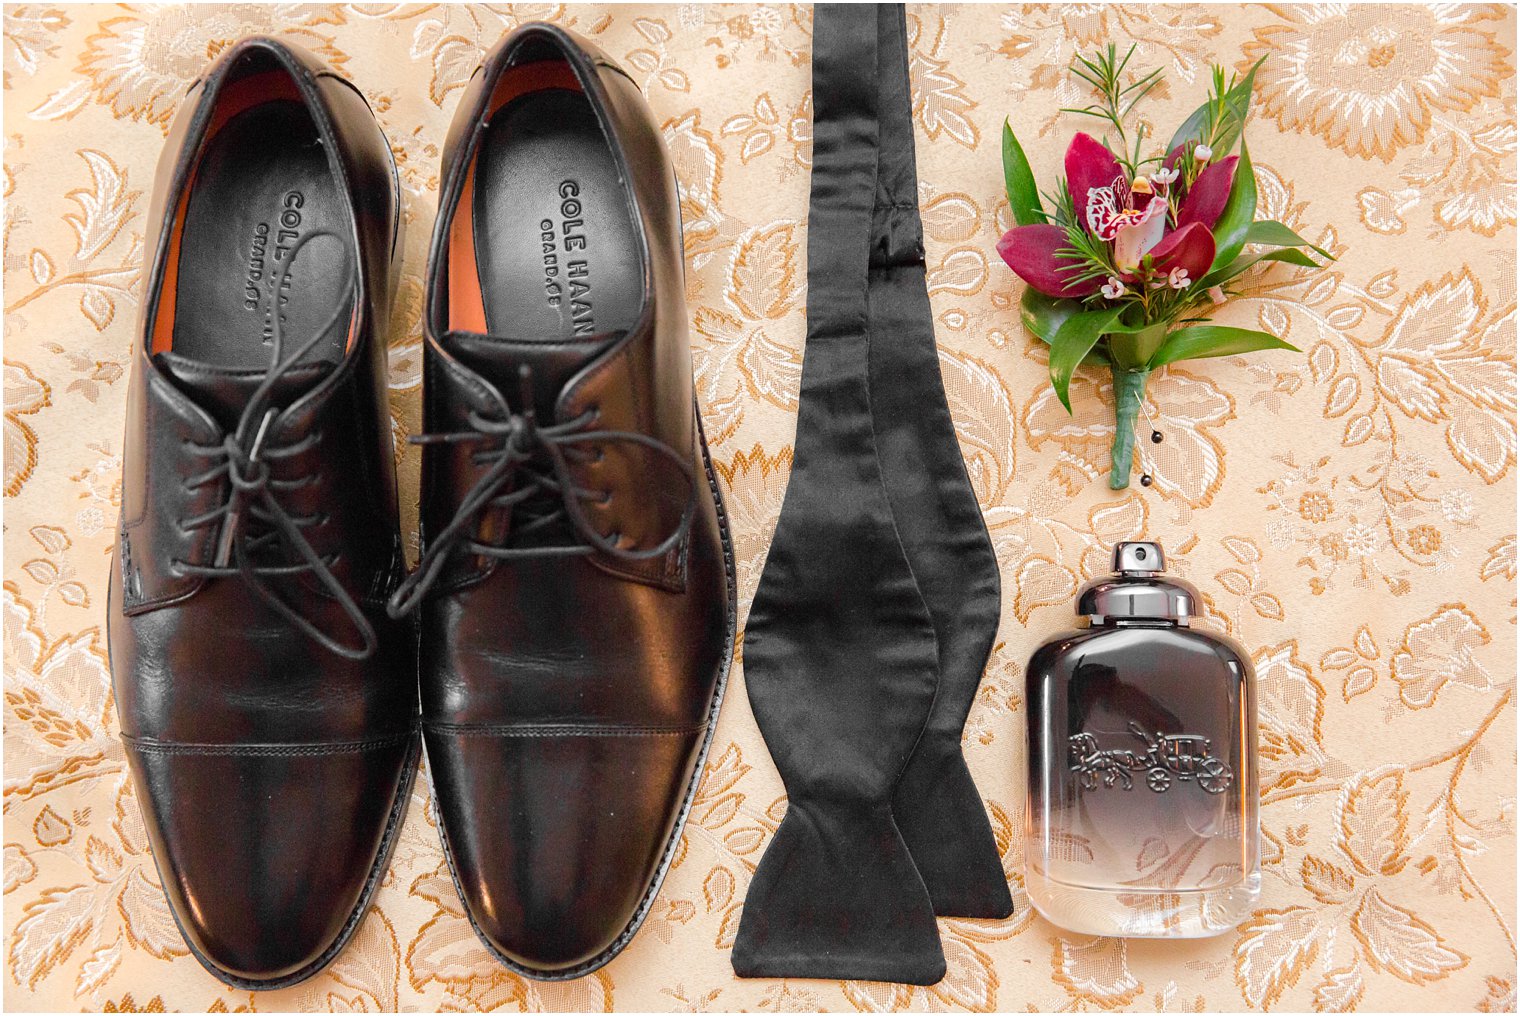 Groom's wedding shoes, black tie, cologne, and boutonniere